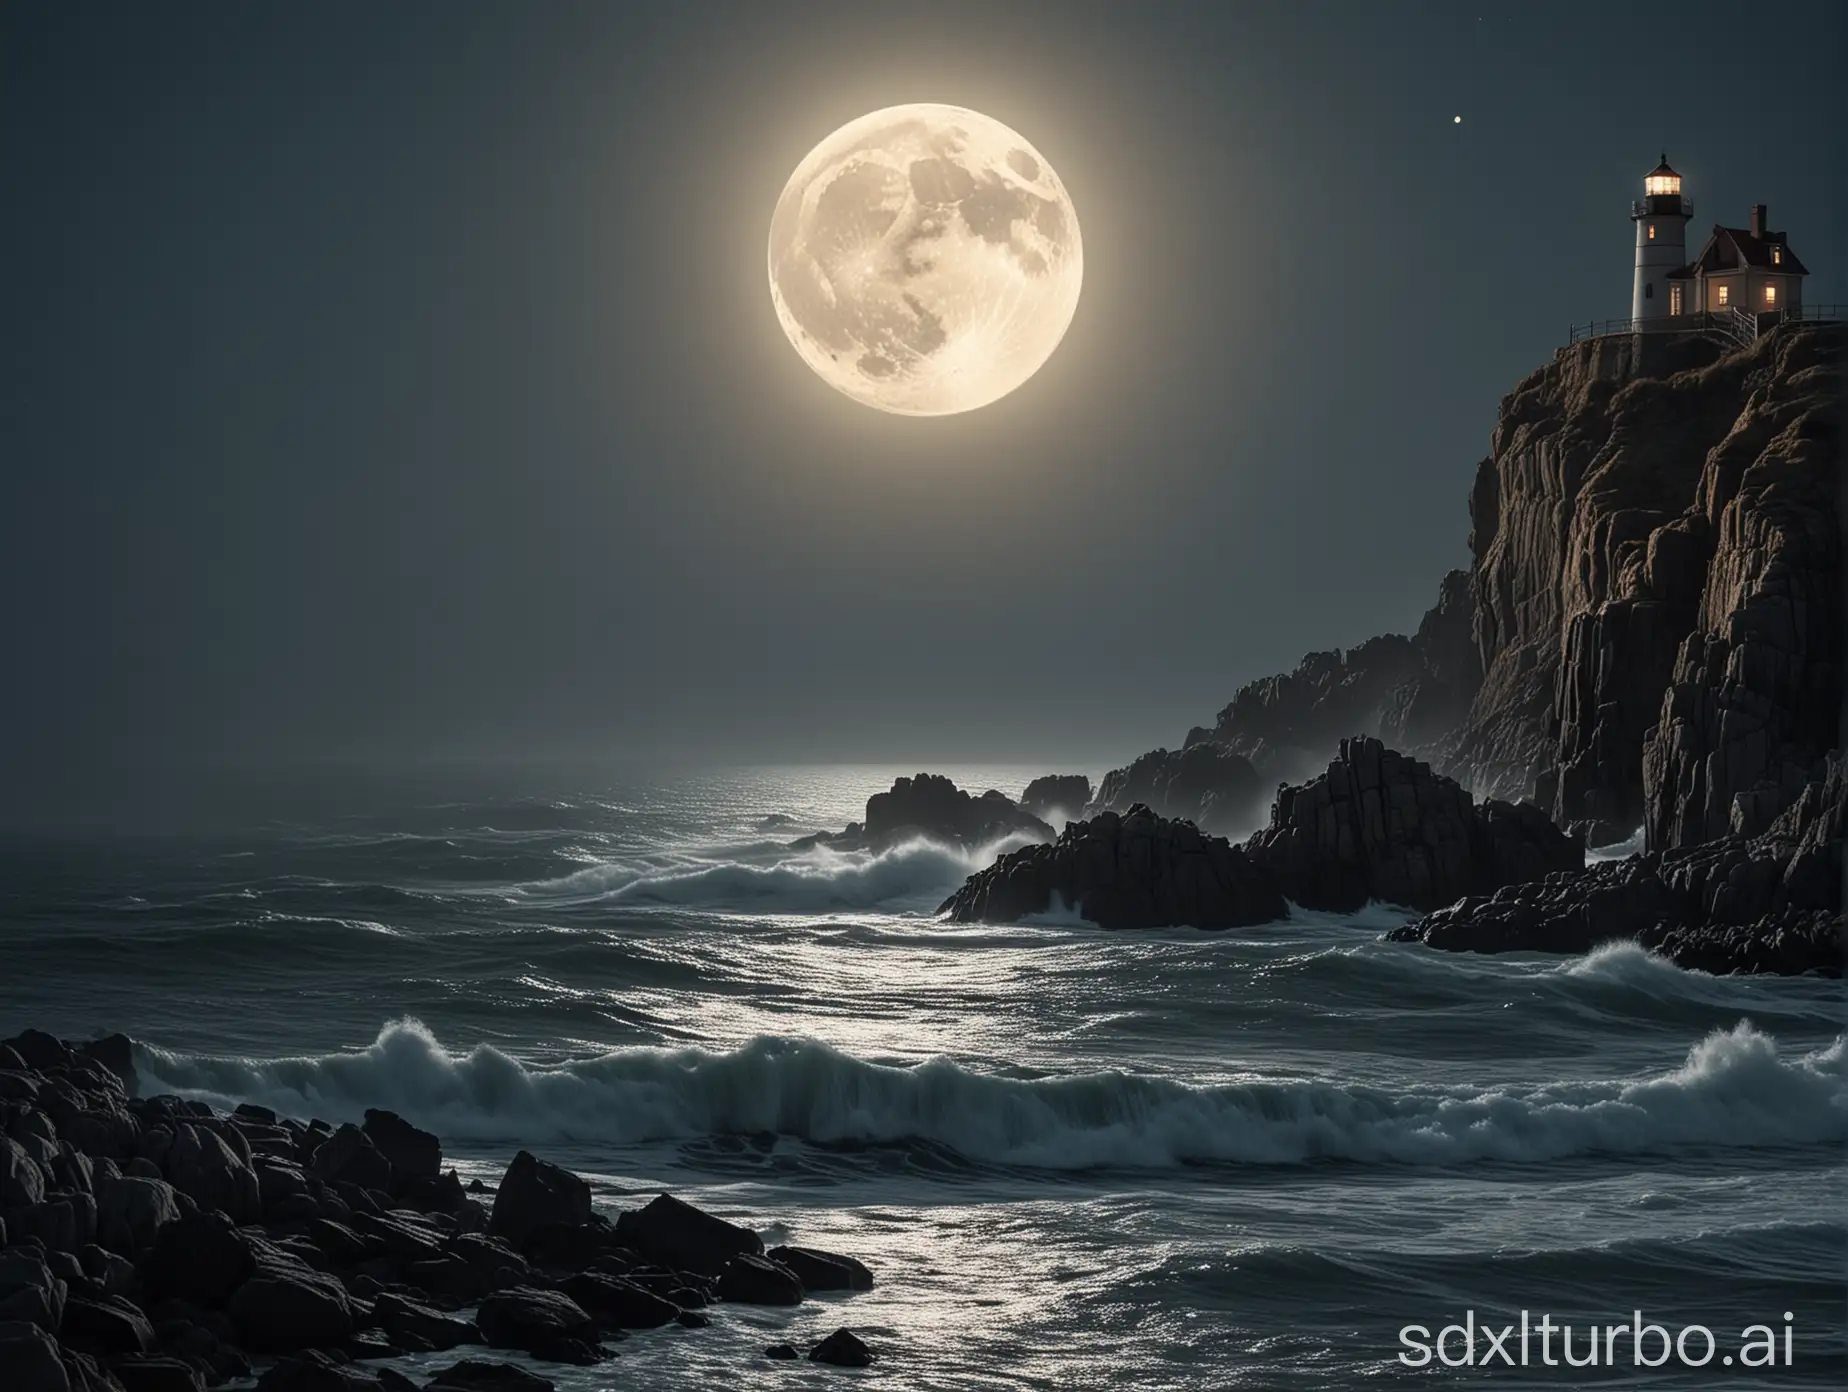 Moonlit-Lighthouse-on-Rocky-Outcrop-with-Waves-in-Foreground